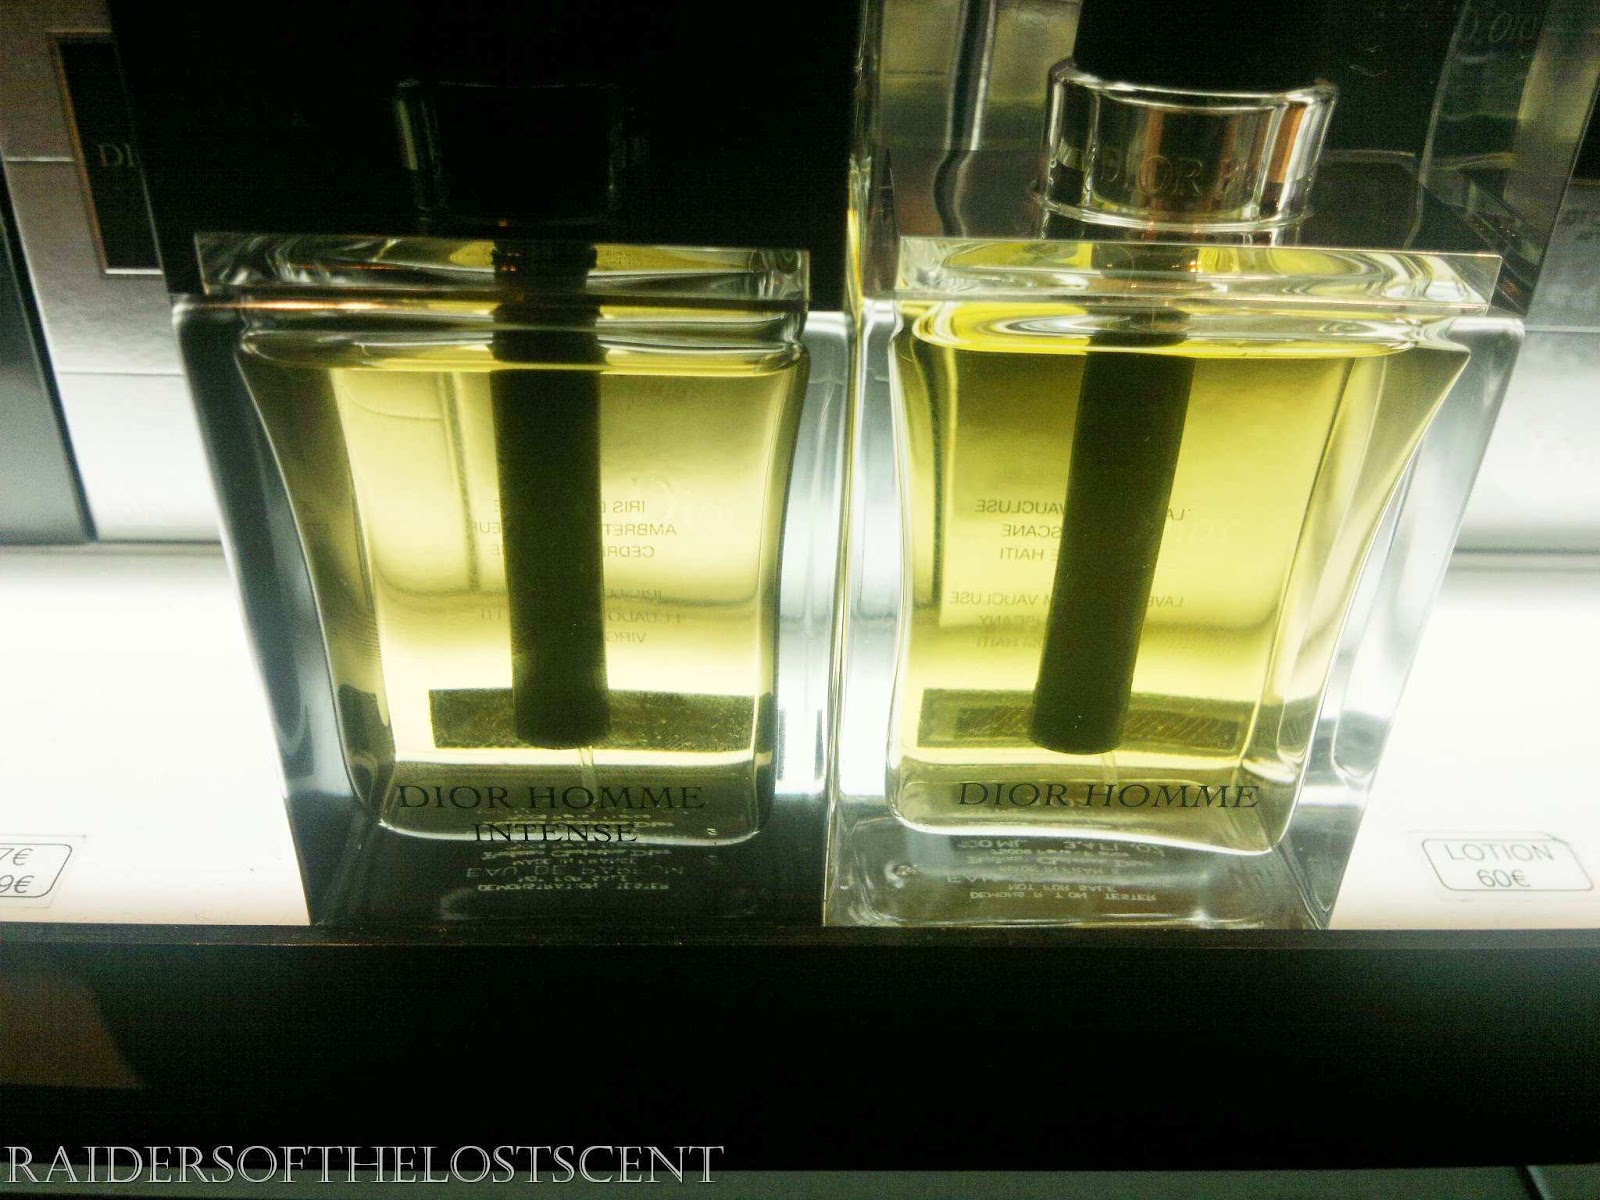 Raiders of the Lost Scent: DIOR HOMME INTENSE 2007-2013 : 9 